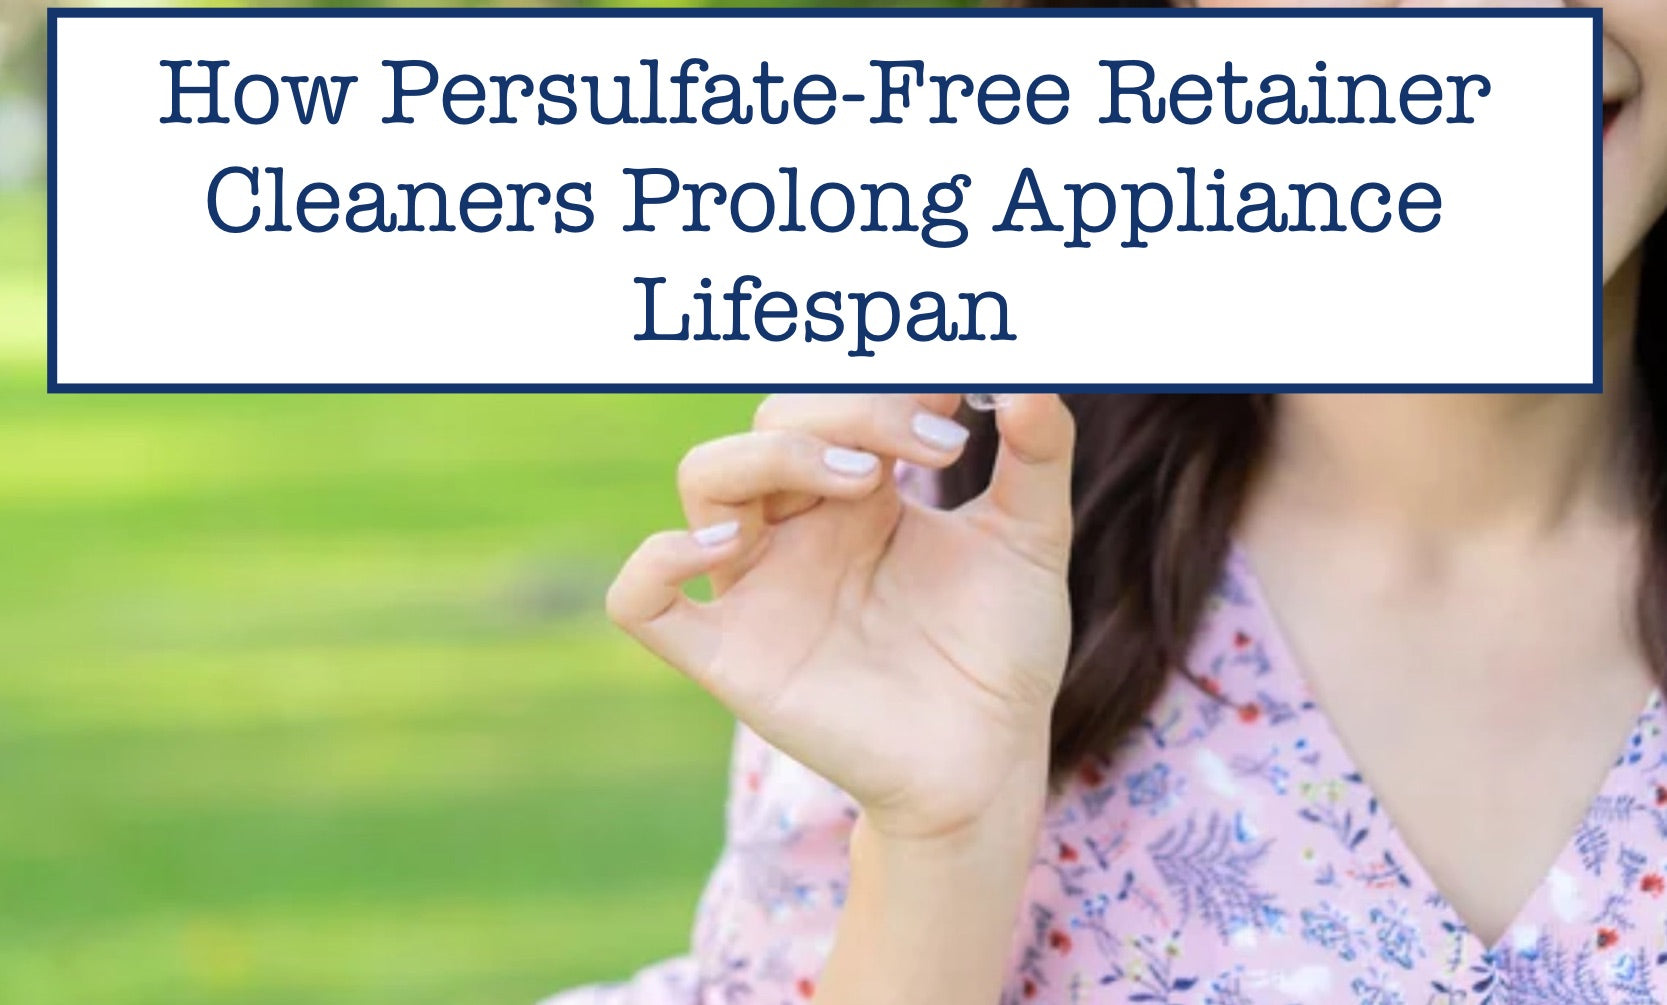 Protecting Your Investment: How Persulfate-Free Retainer Cleaners Prolong Appliance Lifespan